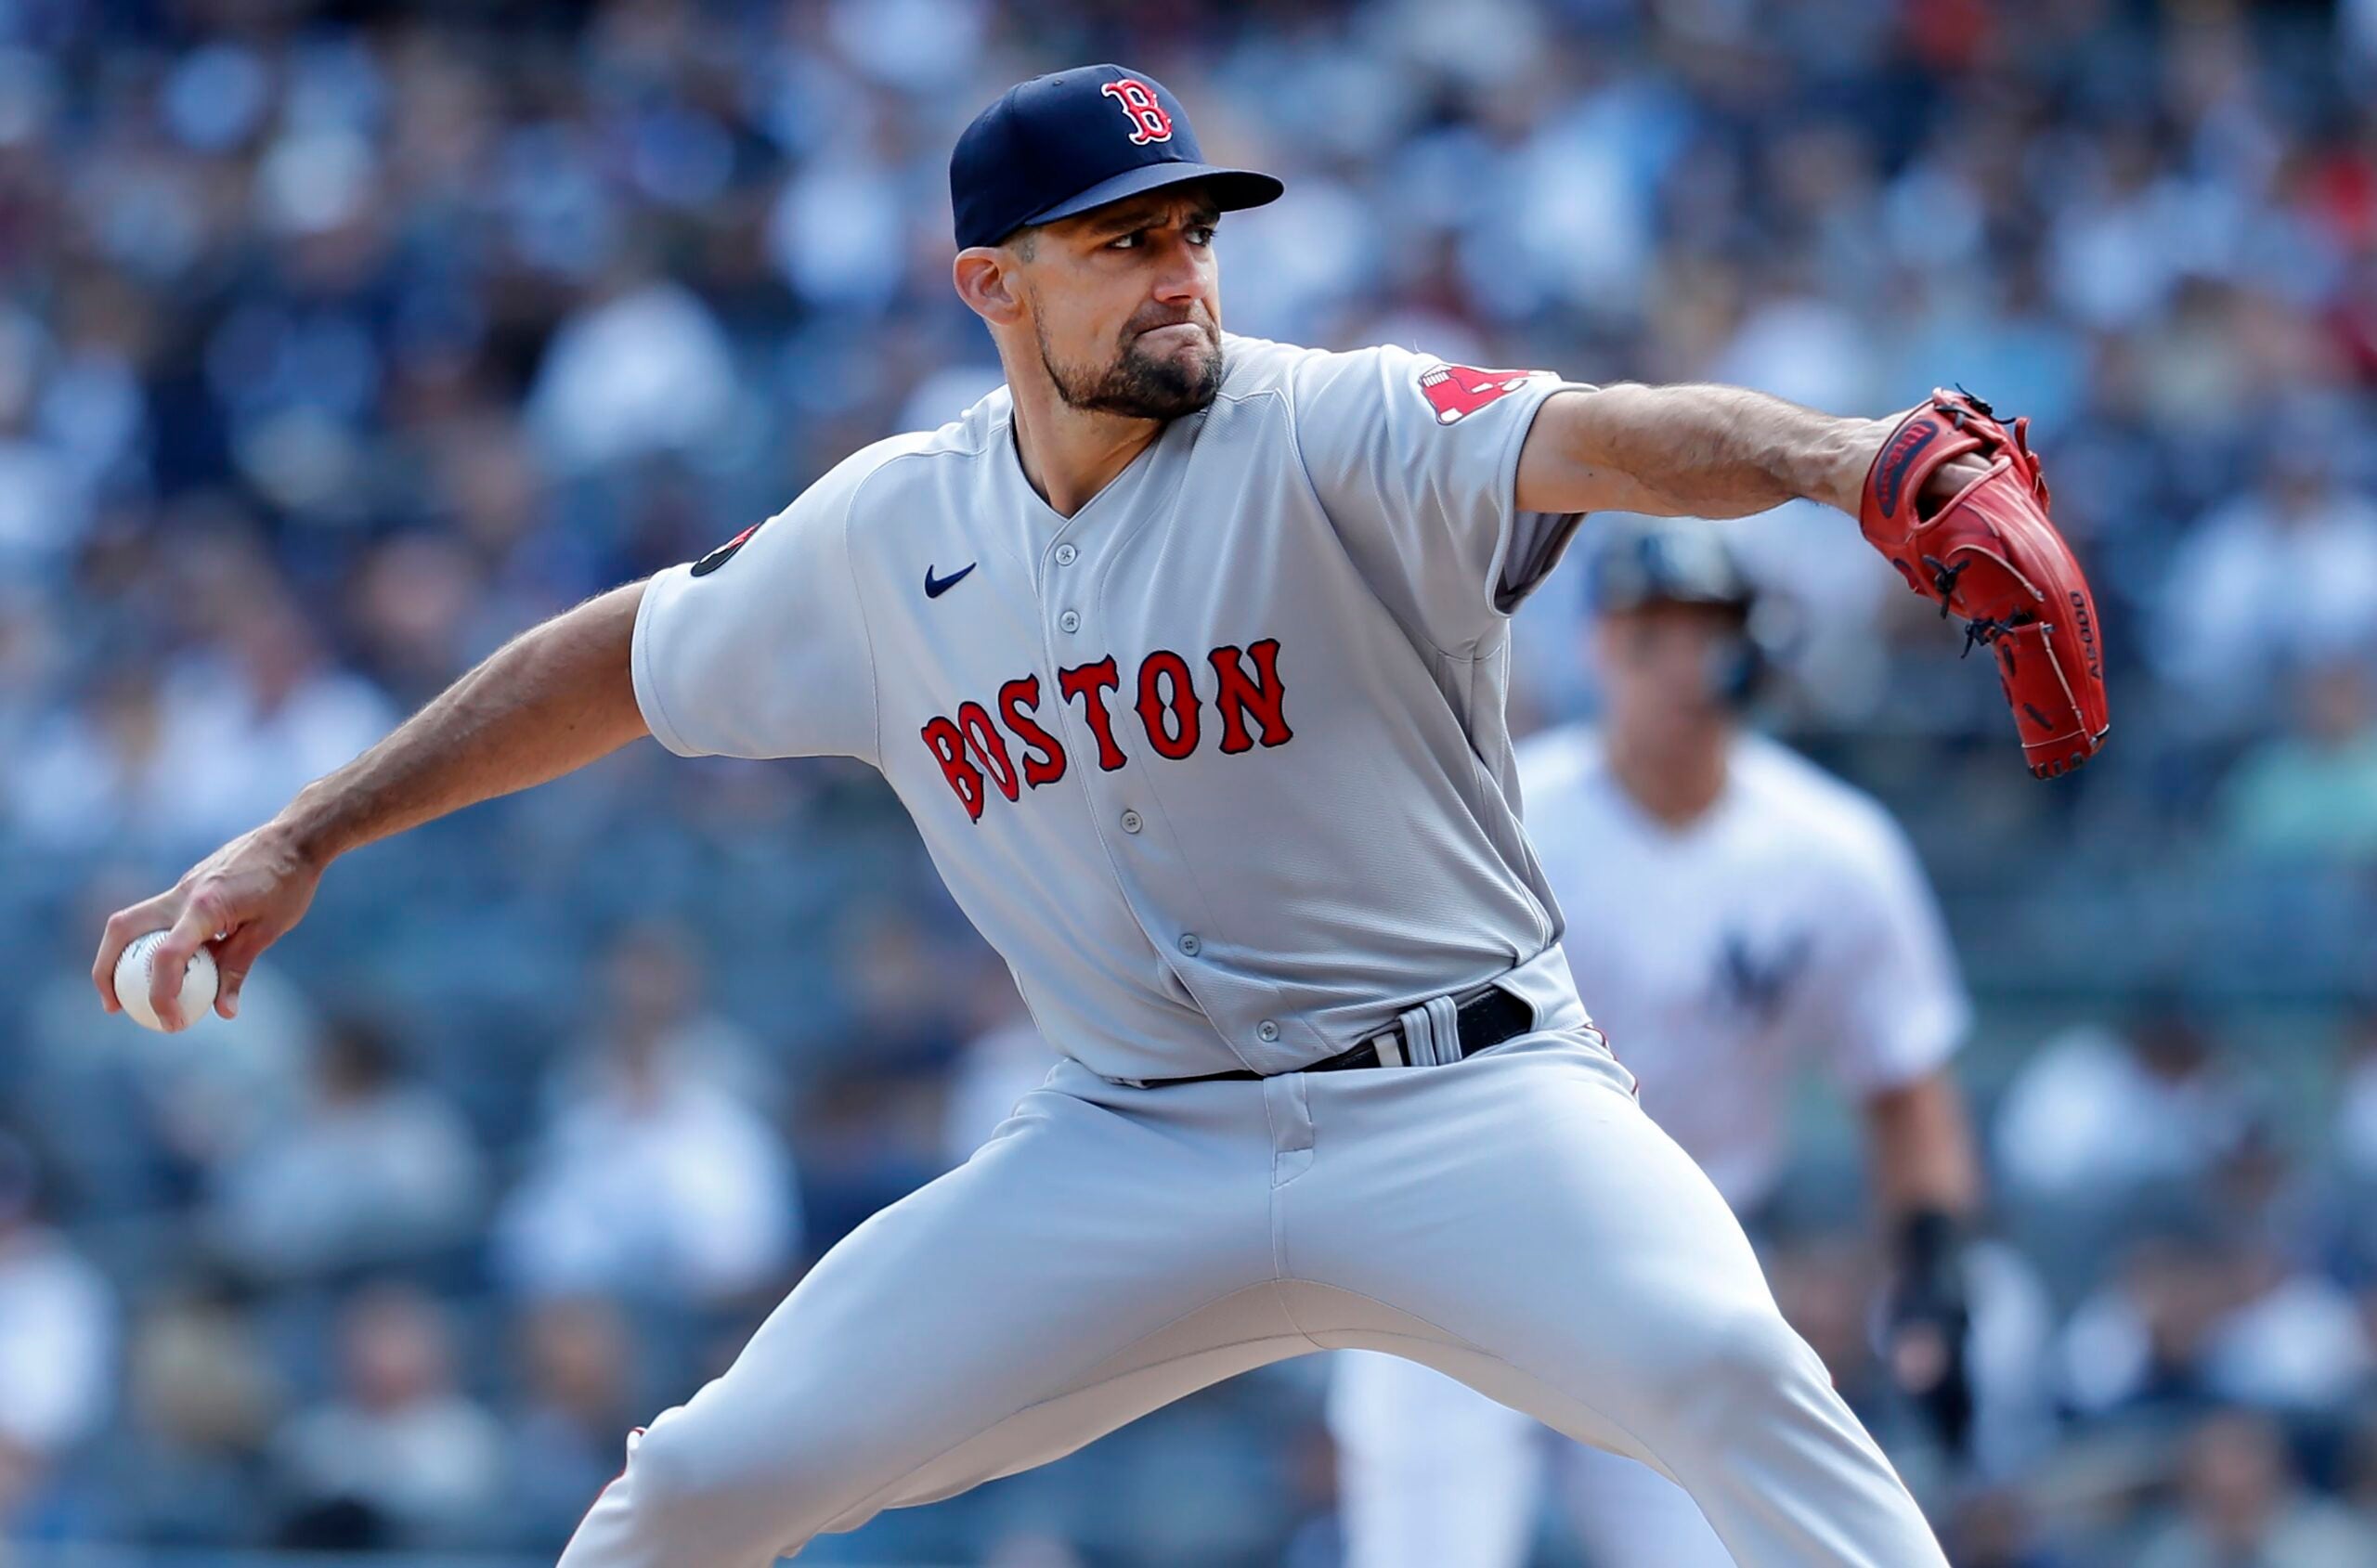 From Pedro to Sale: Ranking the Red Sox' starting rotations of the